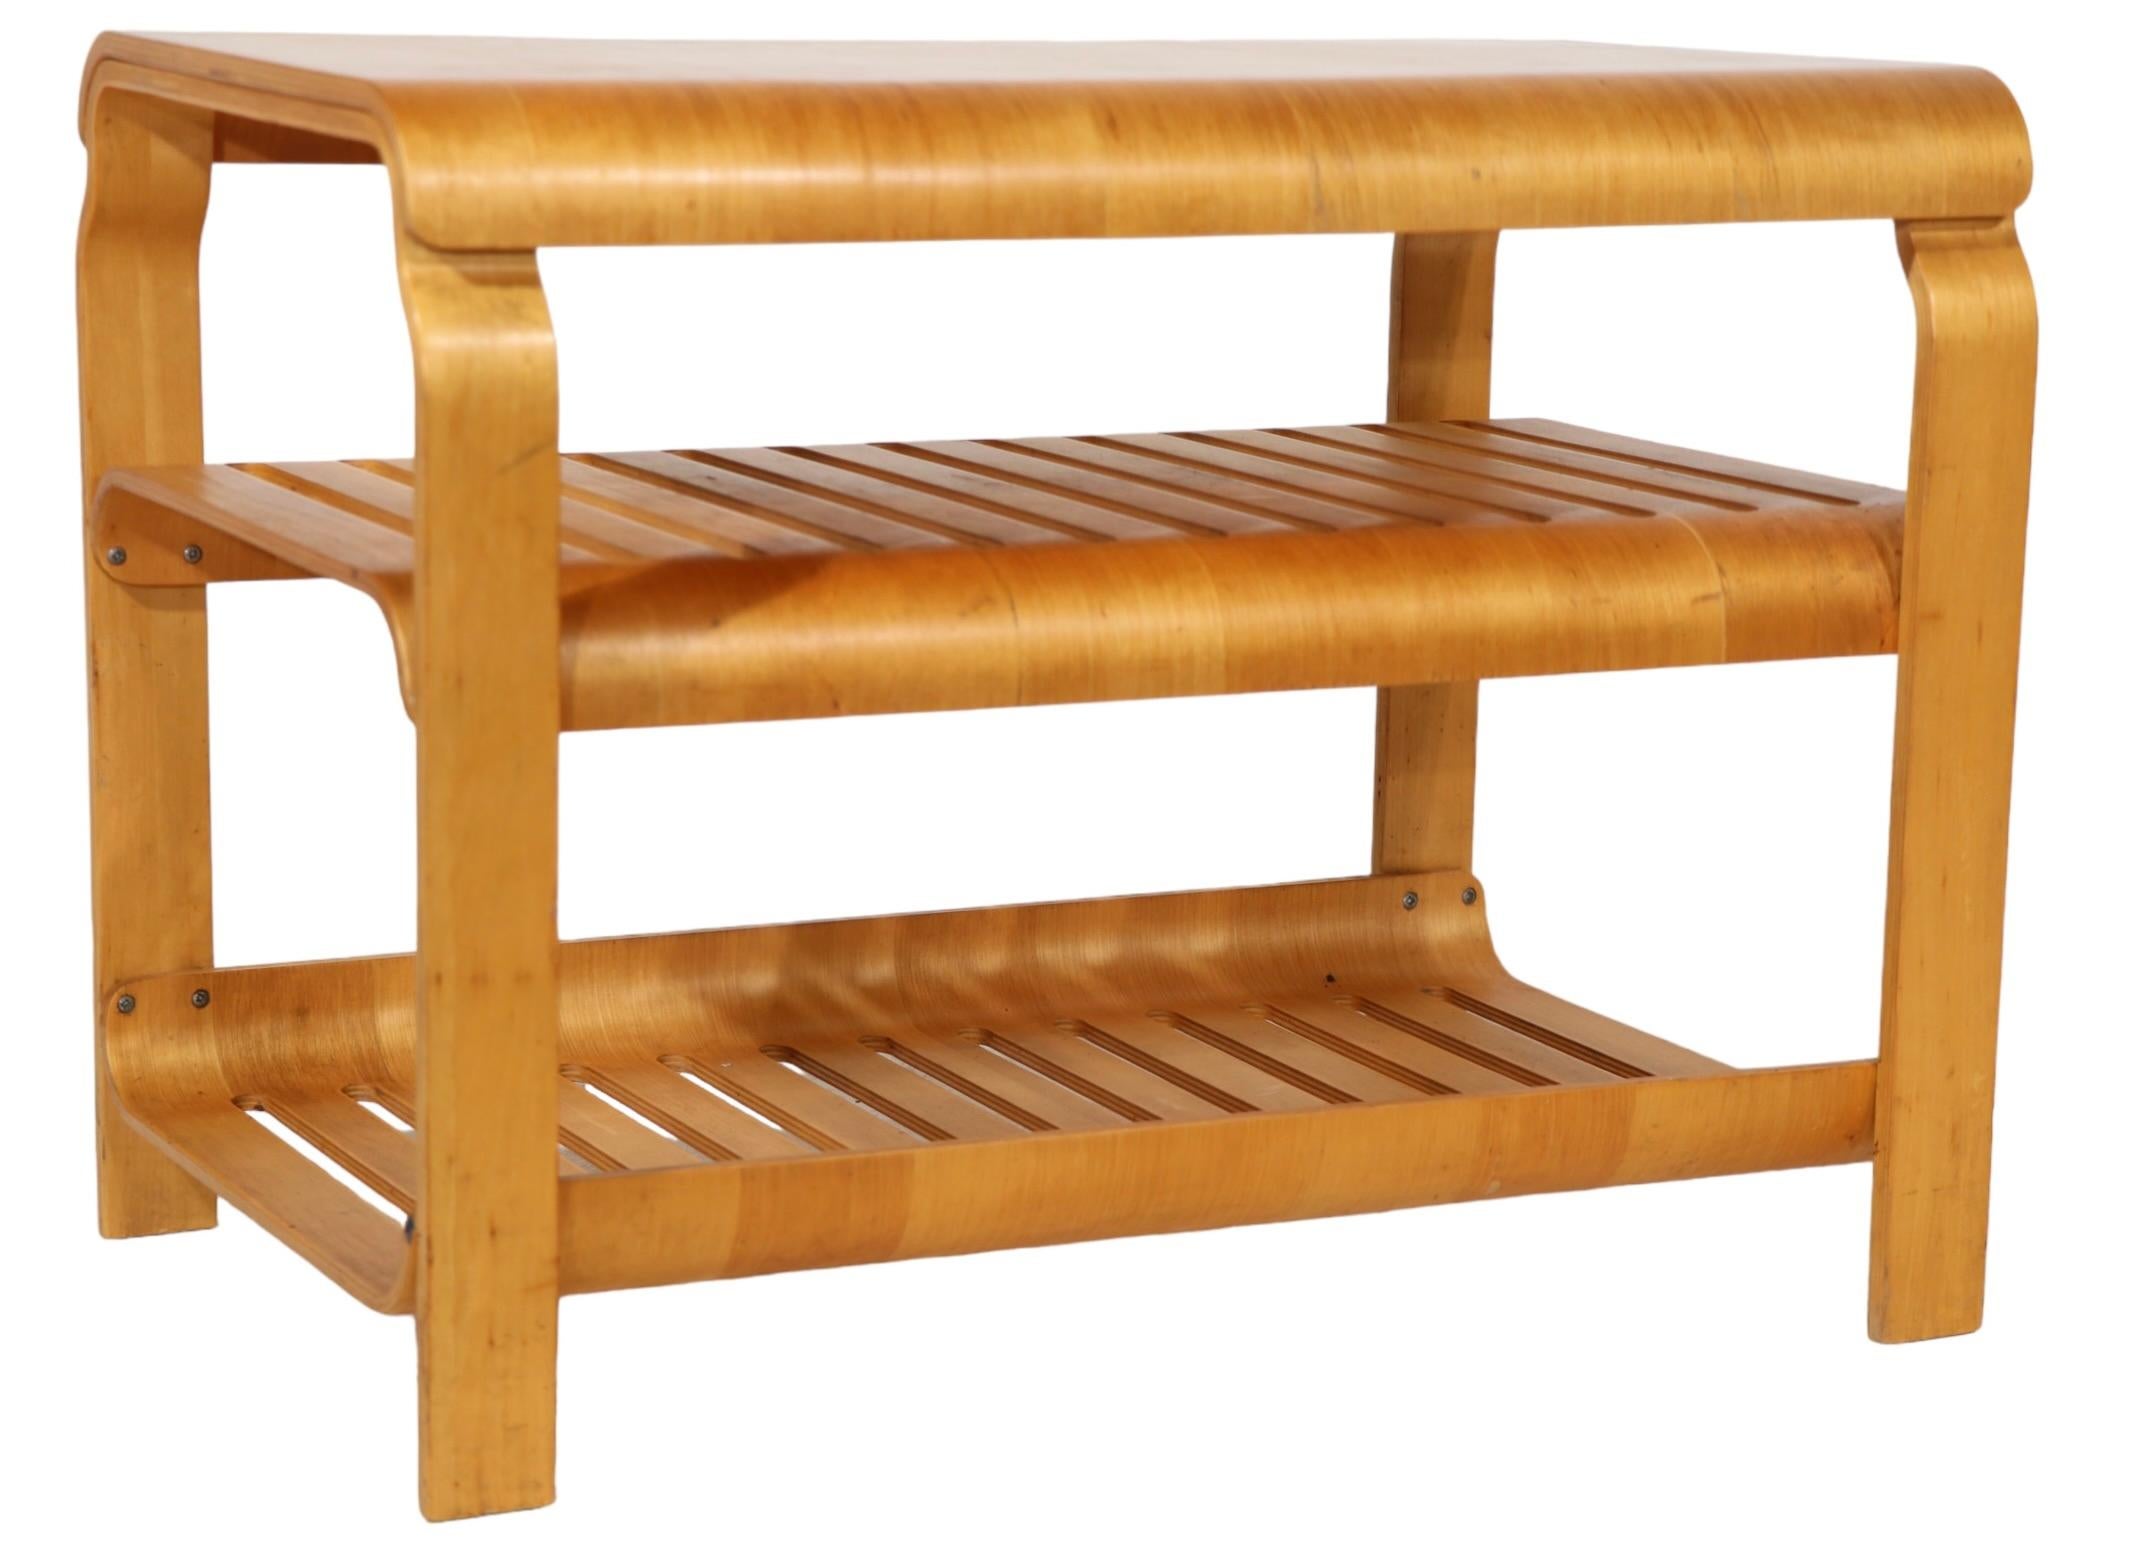 Bentwood three tier table made by Ikea, in the style of Alvar Aalto. The table features formed plywood shelves, which can be adjusted in height and faced curved edge up, or down. This is an early example of the influential and important production